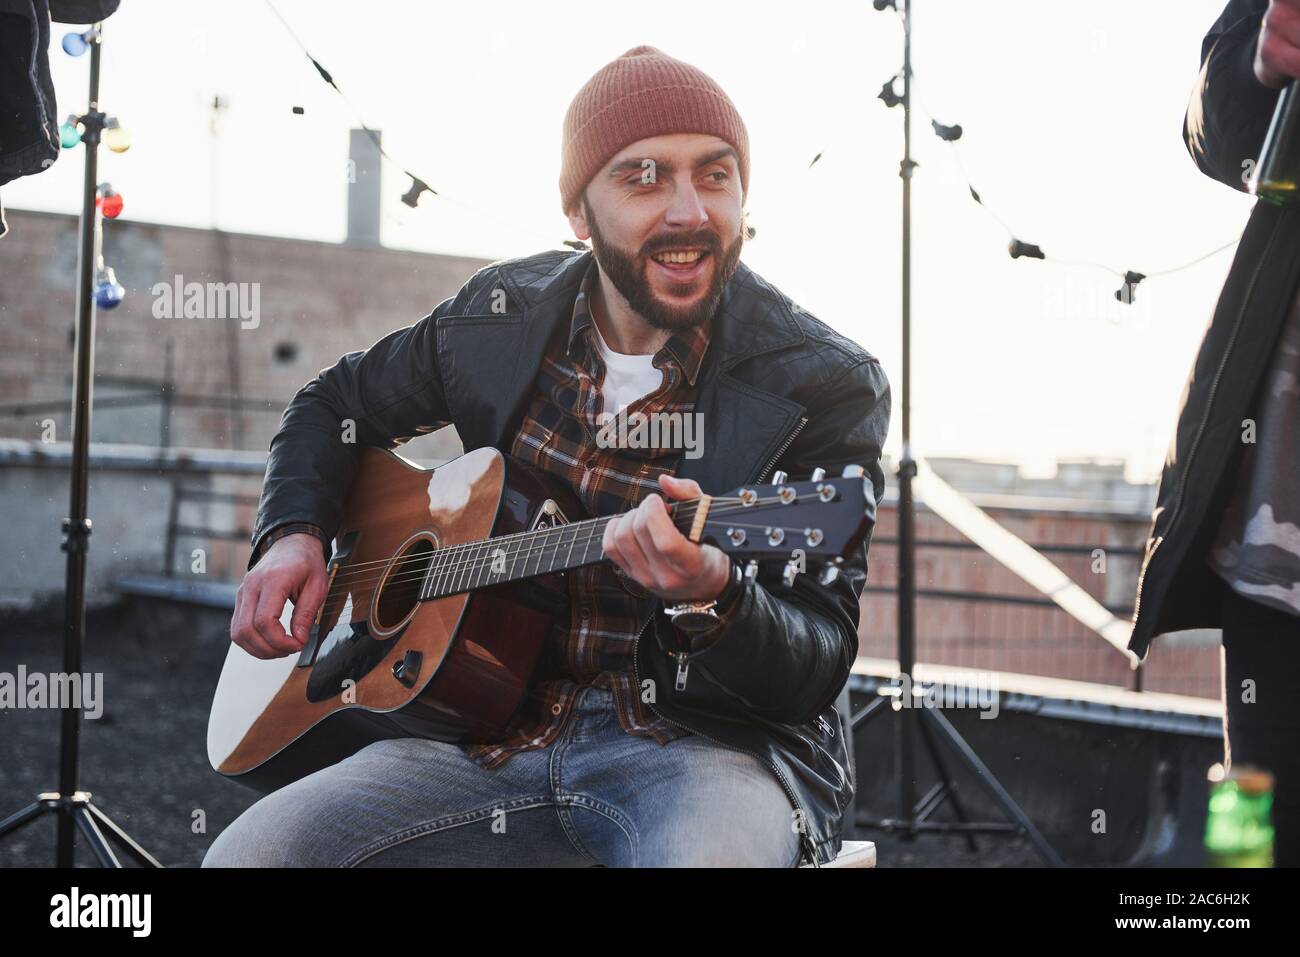 Young bearded man. Guy with acoustic guitar sings. Friends have fun at rooftop party with decorative colored light bulbs Stock Photo